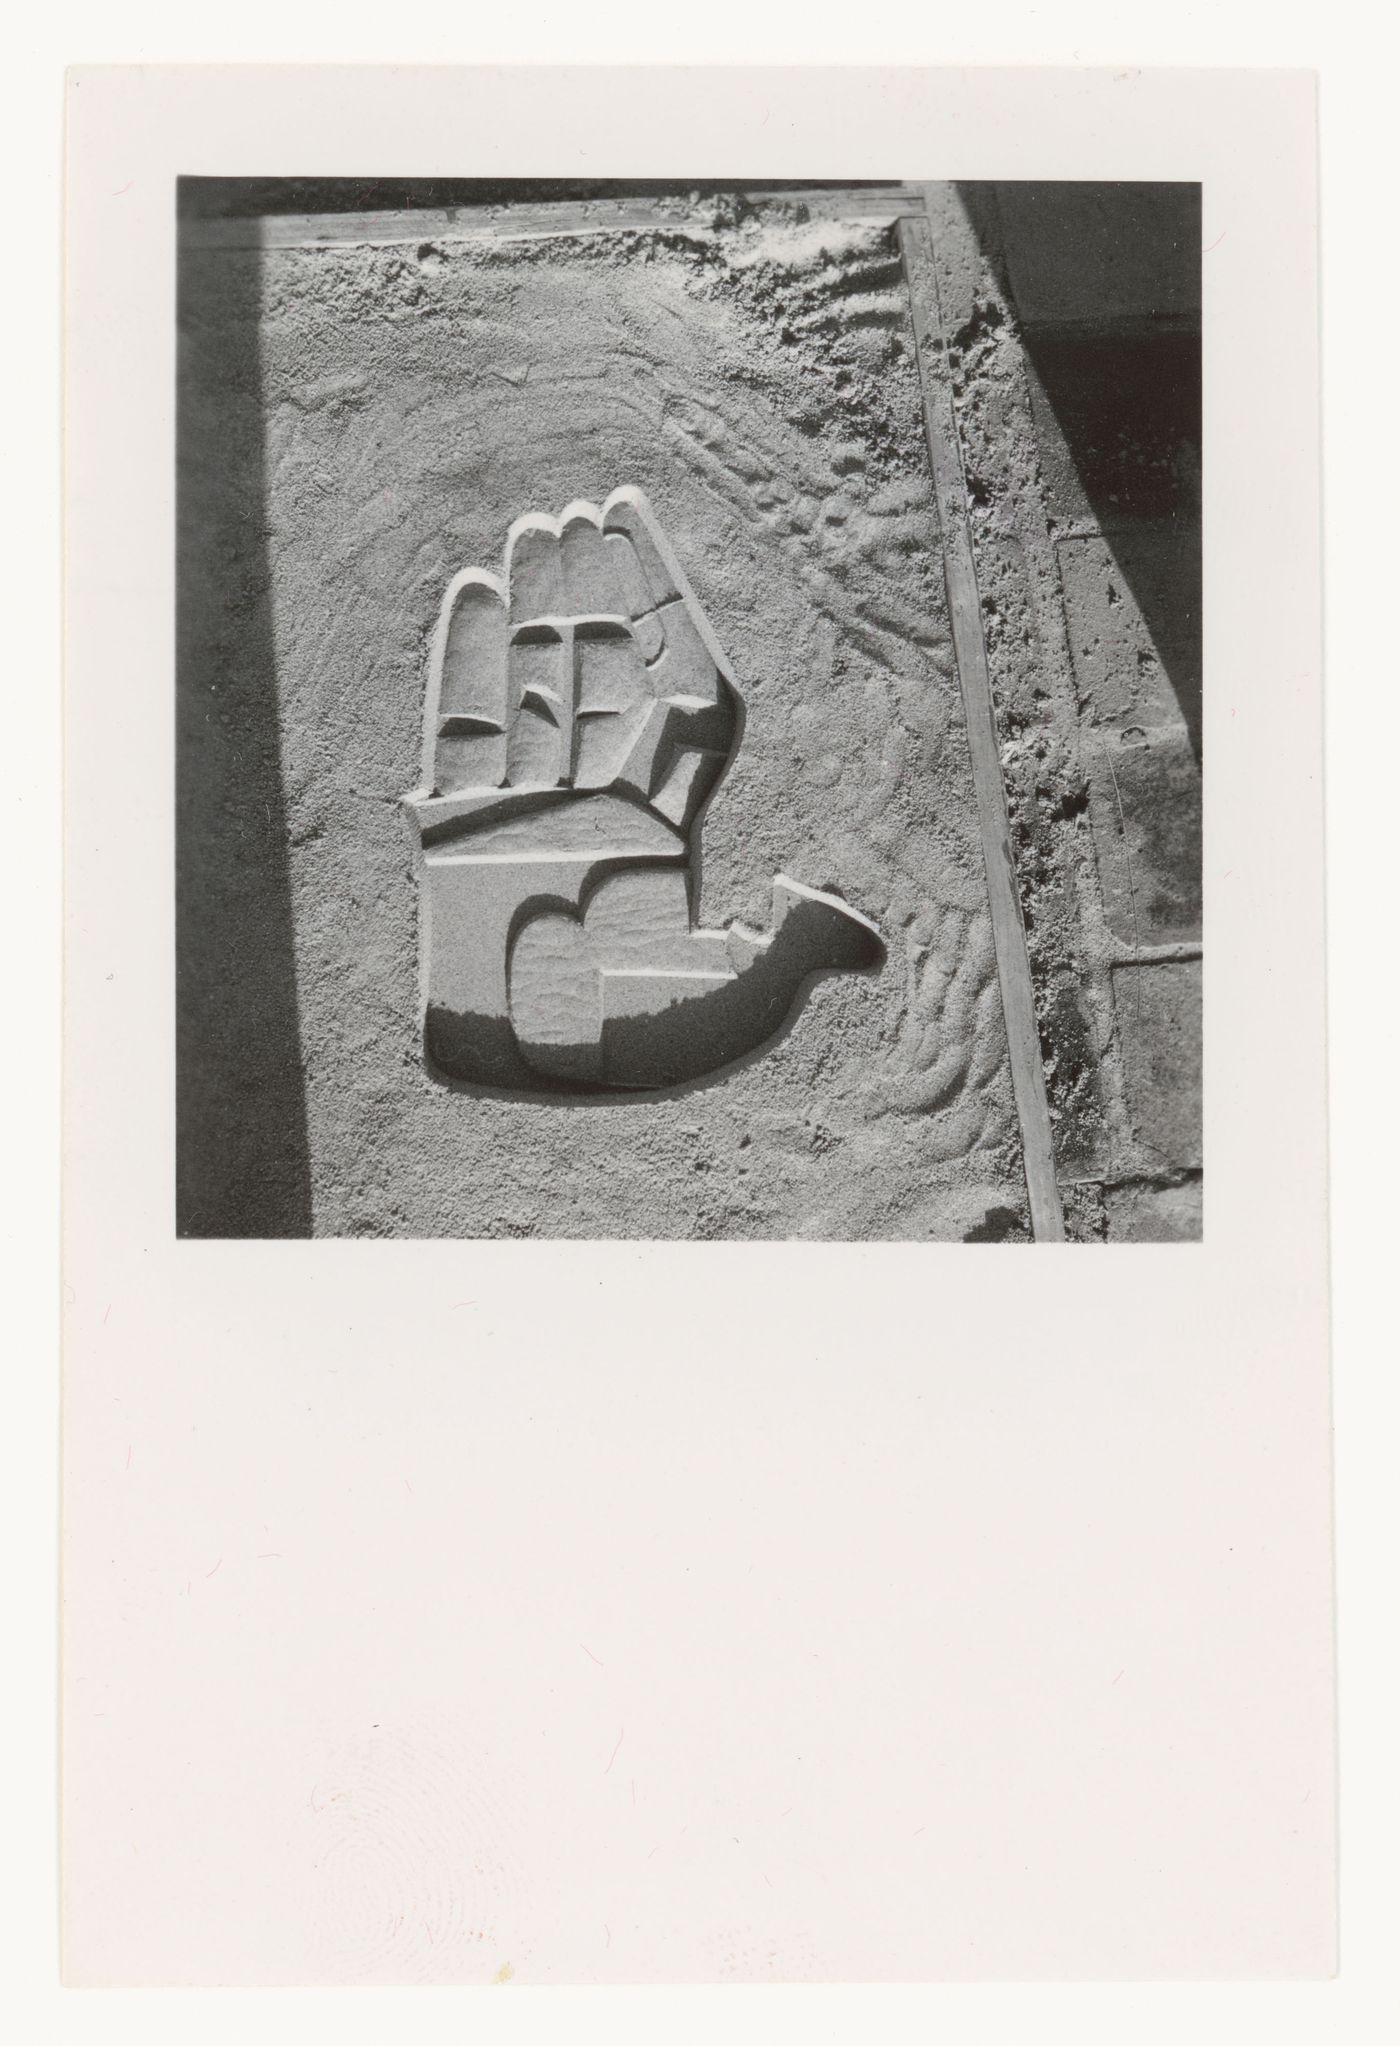 View of a bas-relief of an open hand sign by Le Corbusier, Chandigarh, India